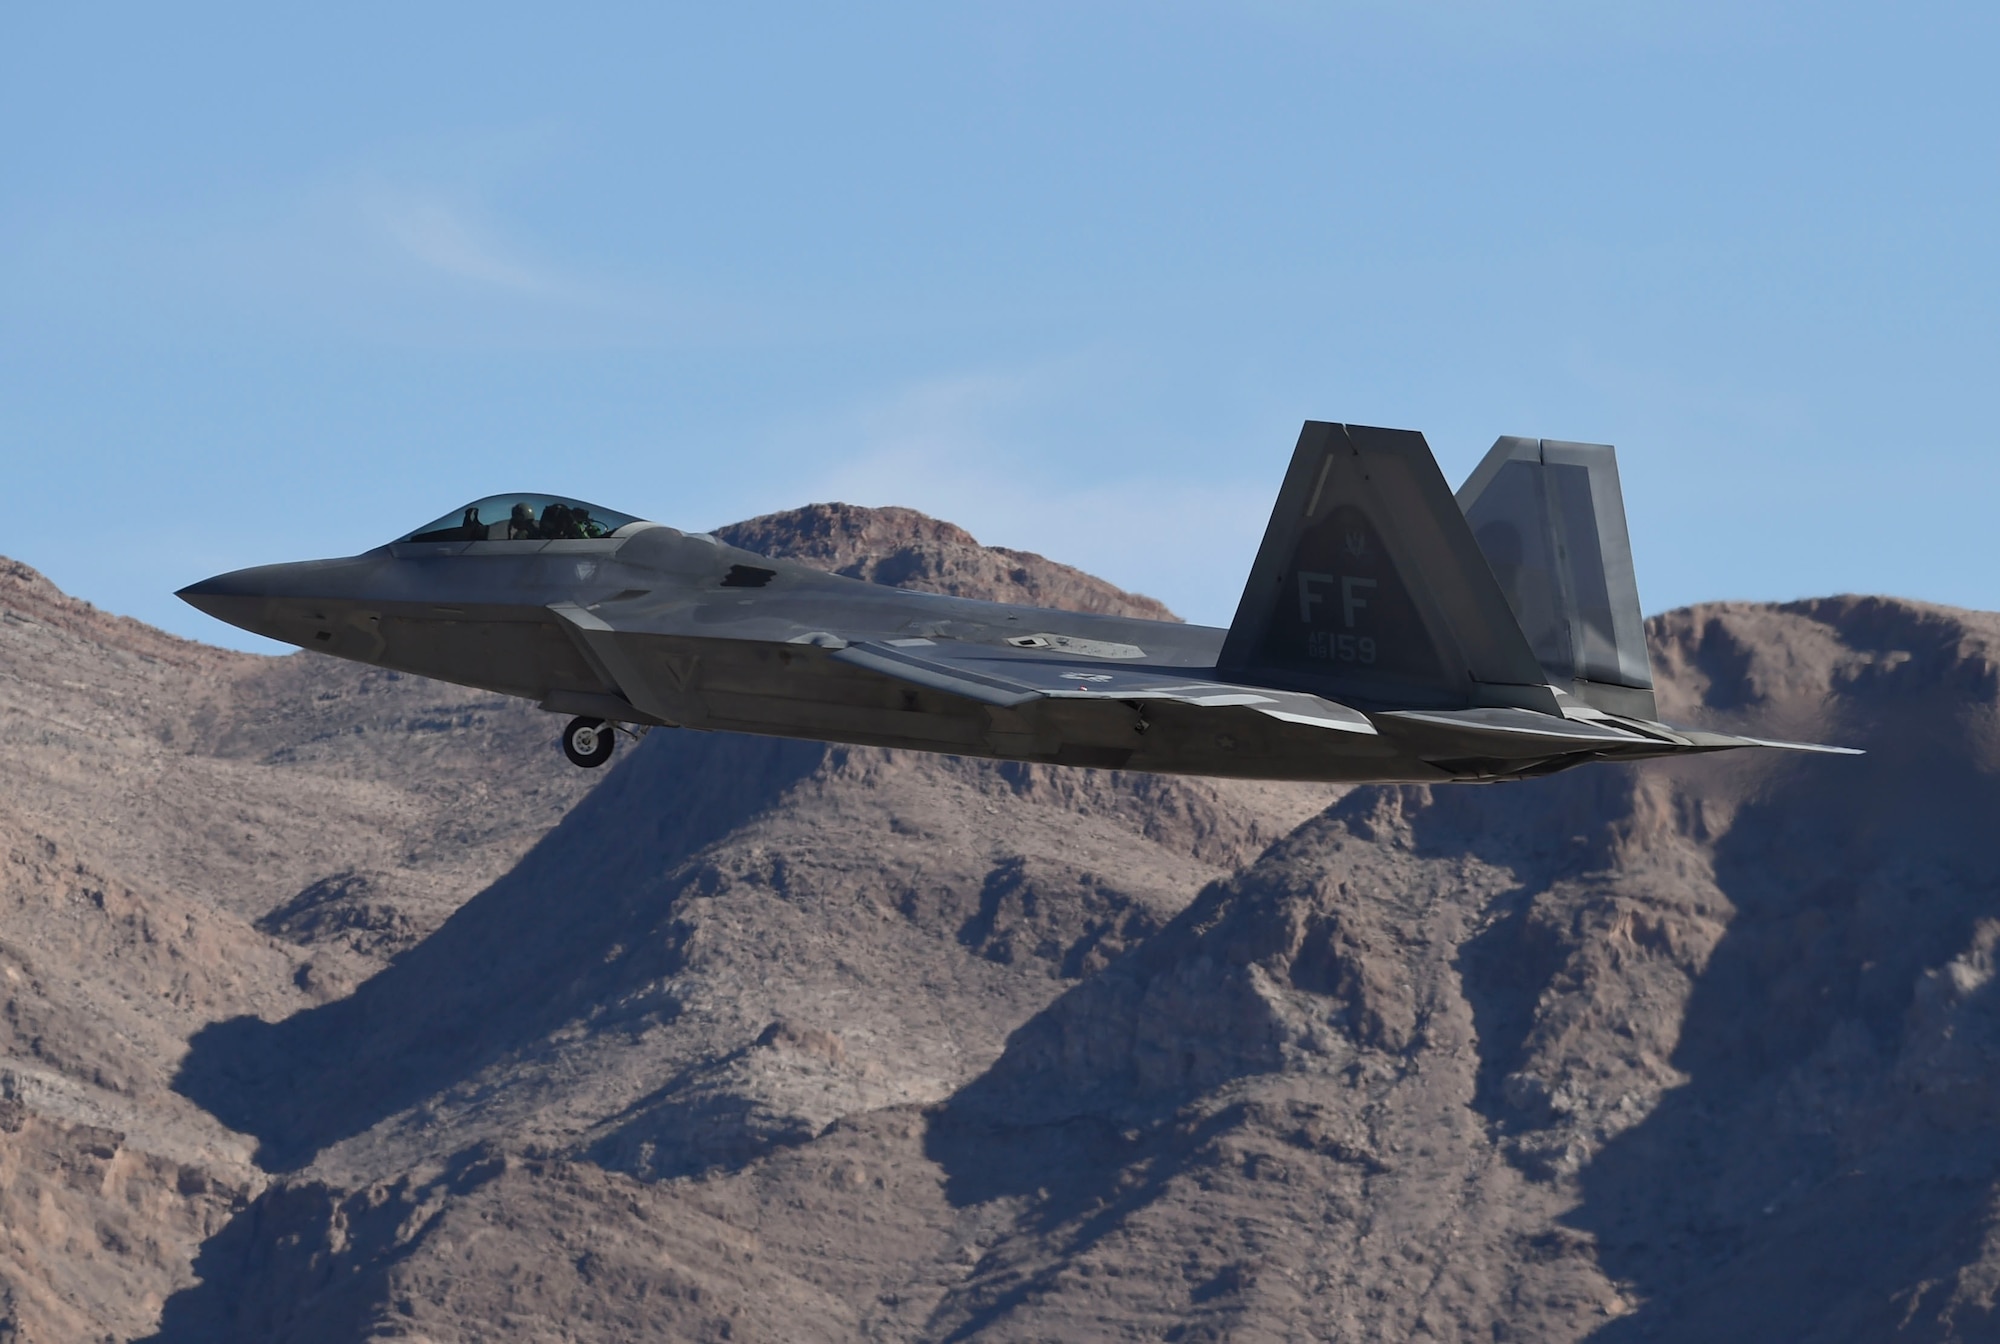 An F-22 Raptor flies over Nellis Air Force Base, Nev., during Red Flag 17-1 Jan. 26, 2017. The Raptor is a multi-role stealth fighter aircraft that not only suppresses its own targets, but provides support for U.S. and coalition fourth-generation aircraft targeting as well. (U.S Air Force photo by Staff Sgt. Natasha Stannard)